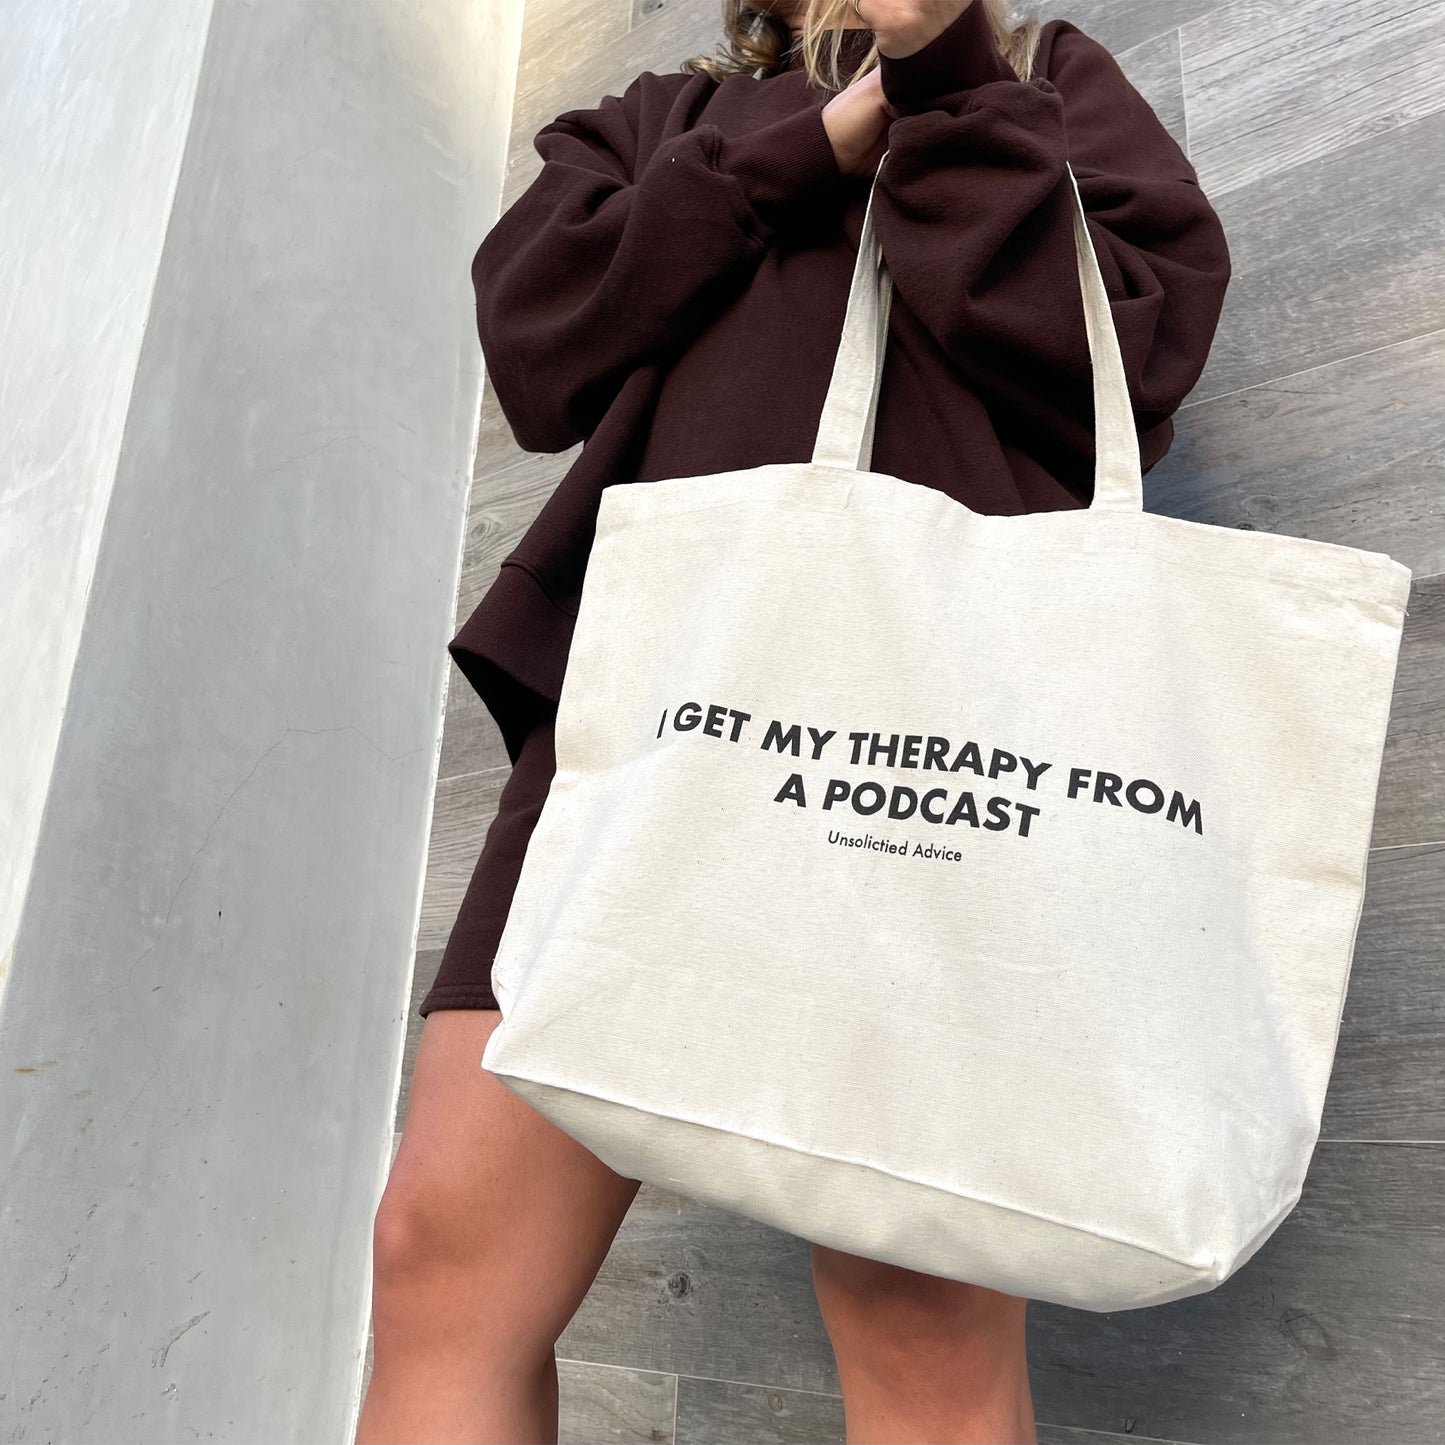 Unsolicited Advice: Therapy Tote